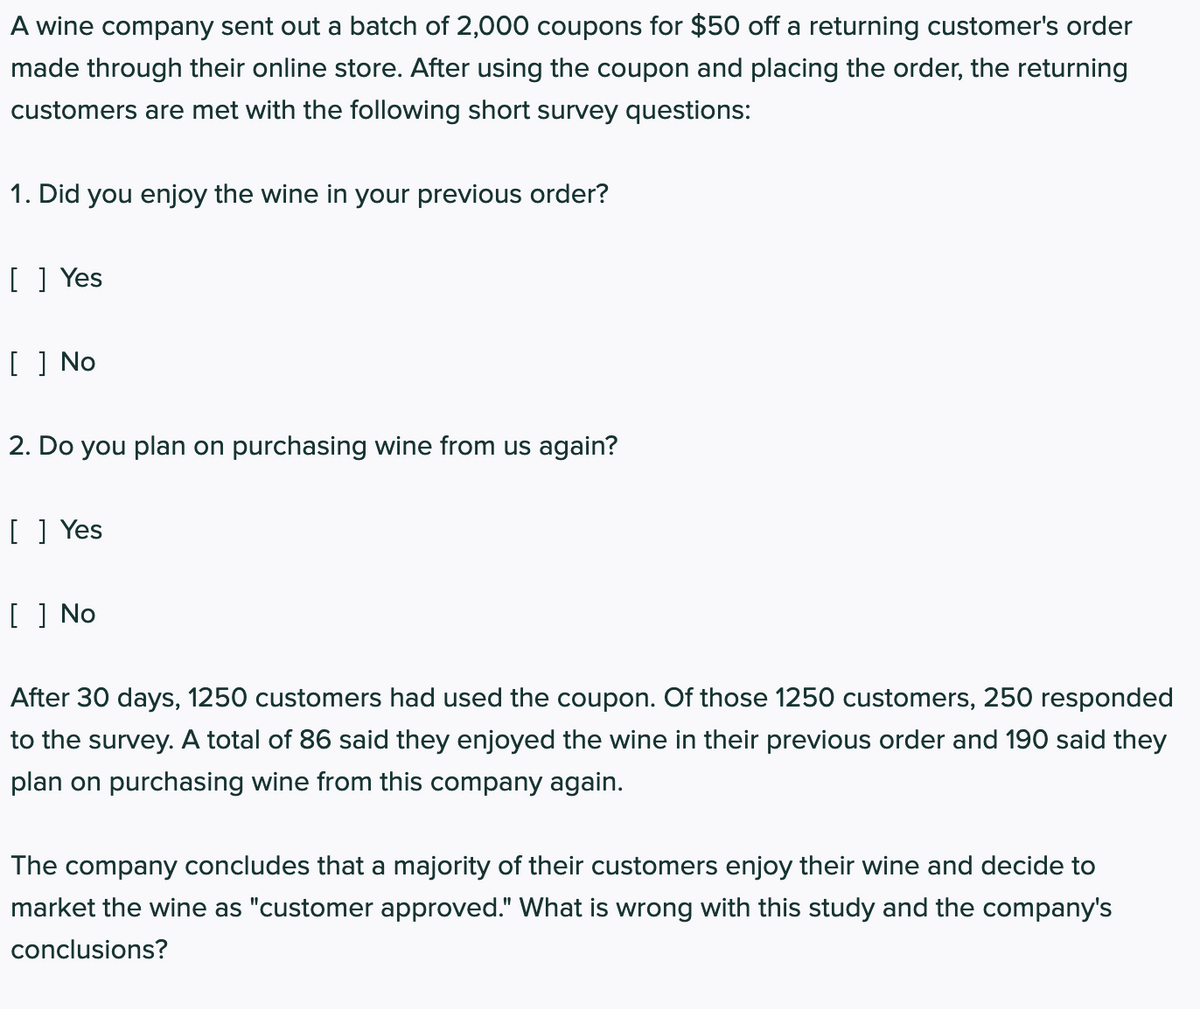 A wine company sent out a batch of 2,000 coupons for $50 off a returning customer's order
made through their online store. After using the coupon and placing the order, the returning
customers are met with the following short survey questions:
1. Did you enjoy the wine in your previous order?
[ ] Yes
[ ] No
2. Do you plan on purchasing wine from us again?
[ ] Yes
[ ] No
After 30 days, 1250 customers had used the coupon. Of those 1250 customers, 250 responded
to the survey. A total of 86 said they enjoyed the wine in their previous order and 190 said they
plan on purchasing wine from this company again.
The company concludes that a majority of their customers enjoy their wine and decide to
market the wine as "customer approved." What is wrong with this study and the company's
conclusions?
